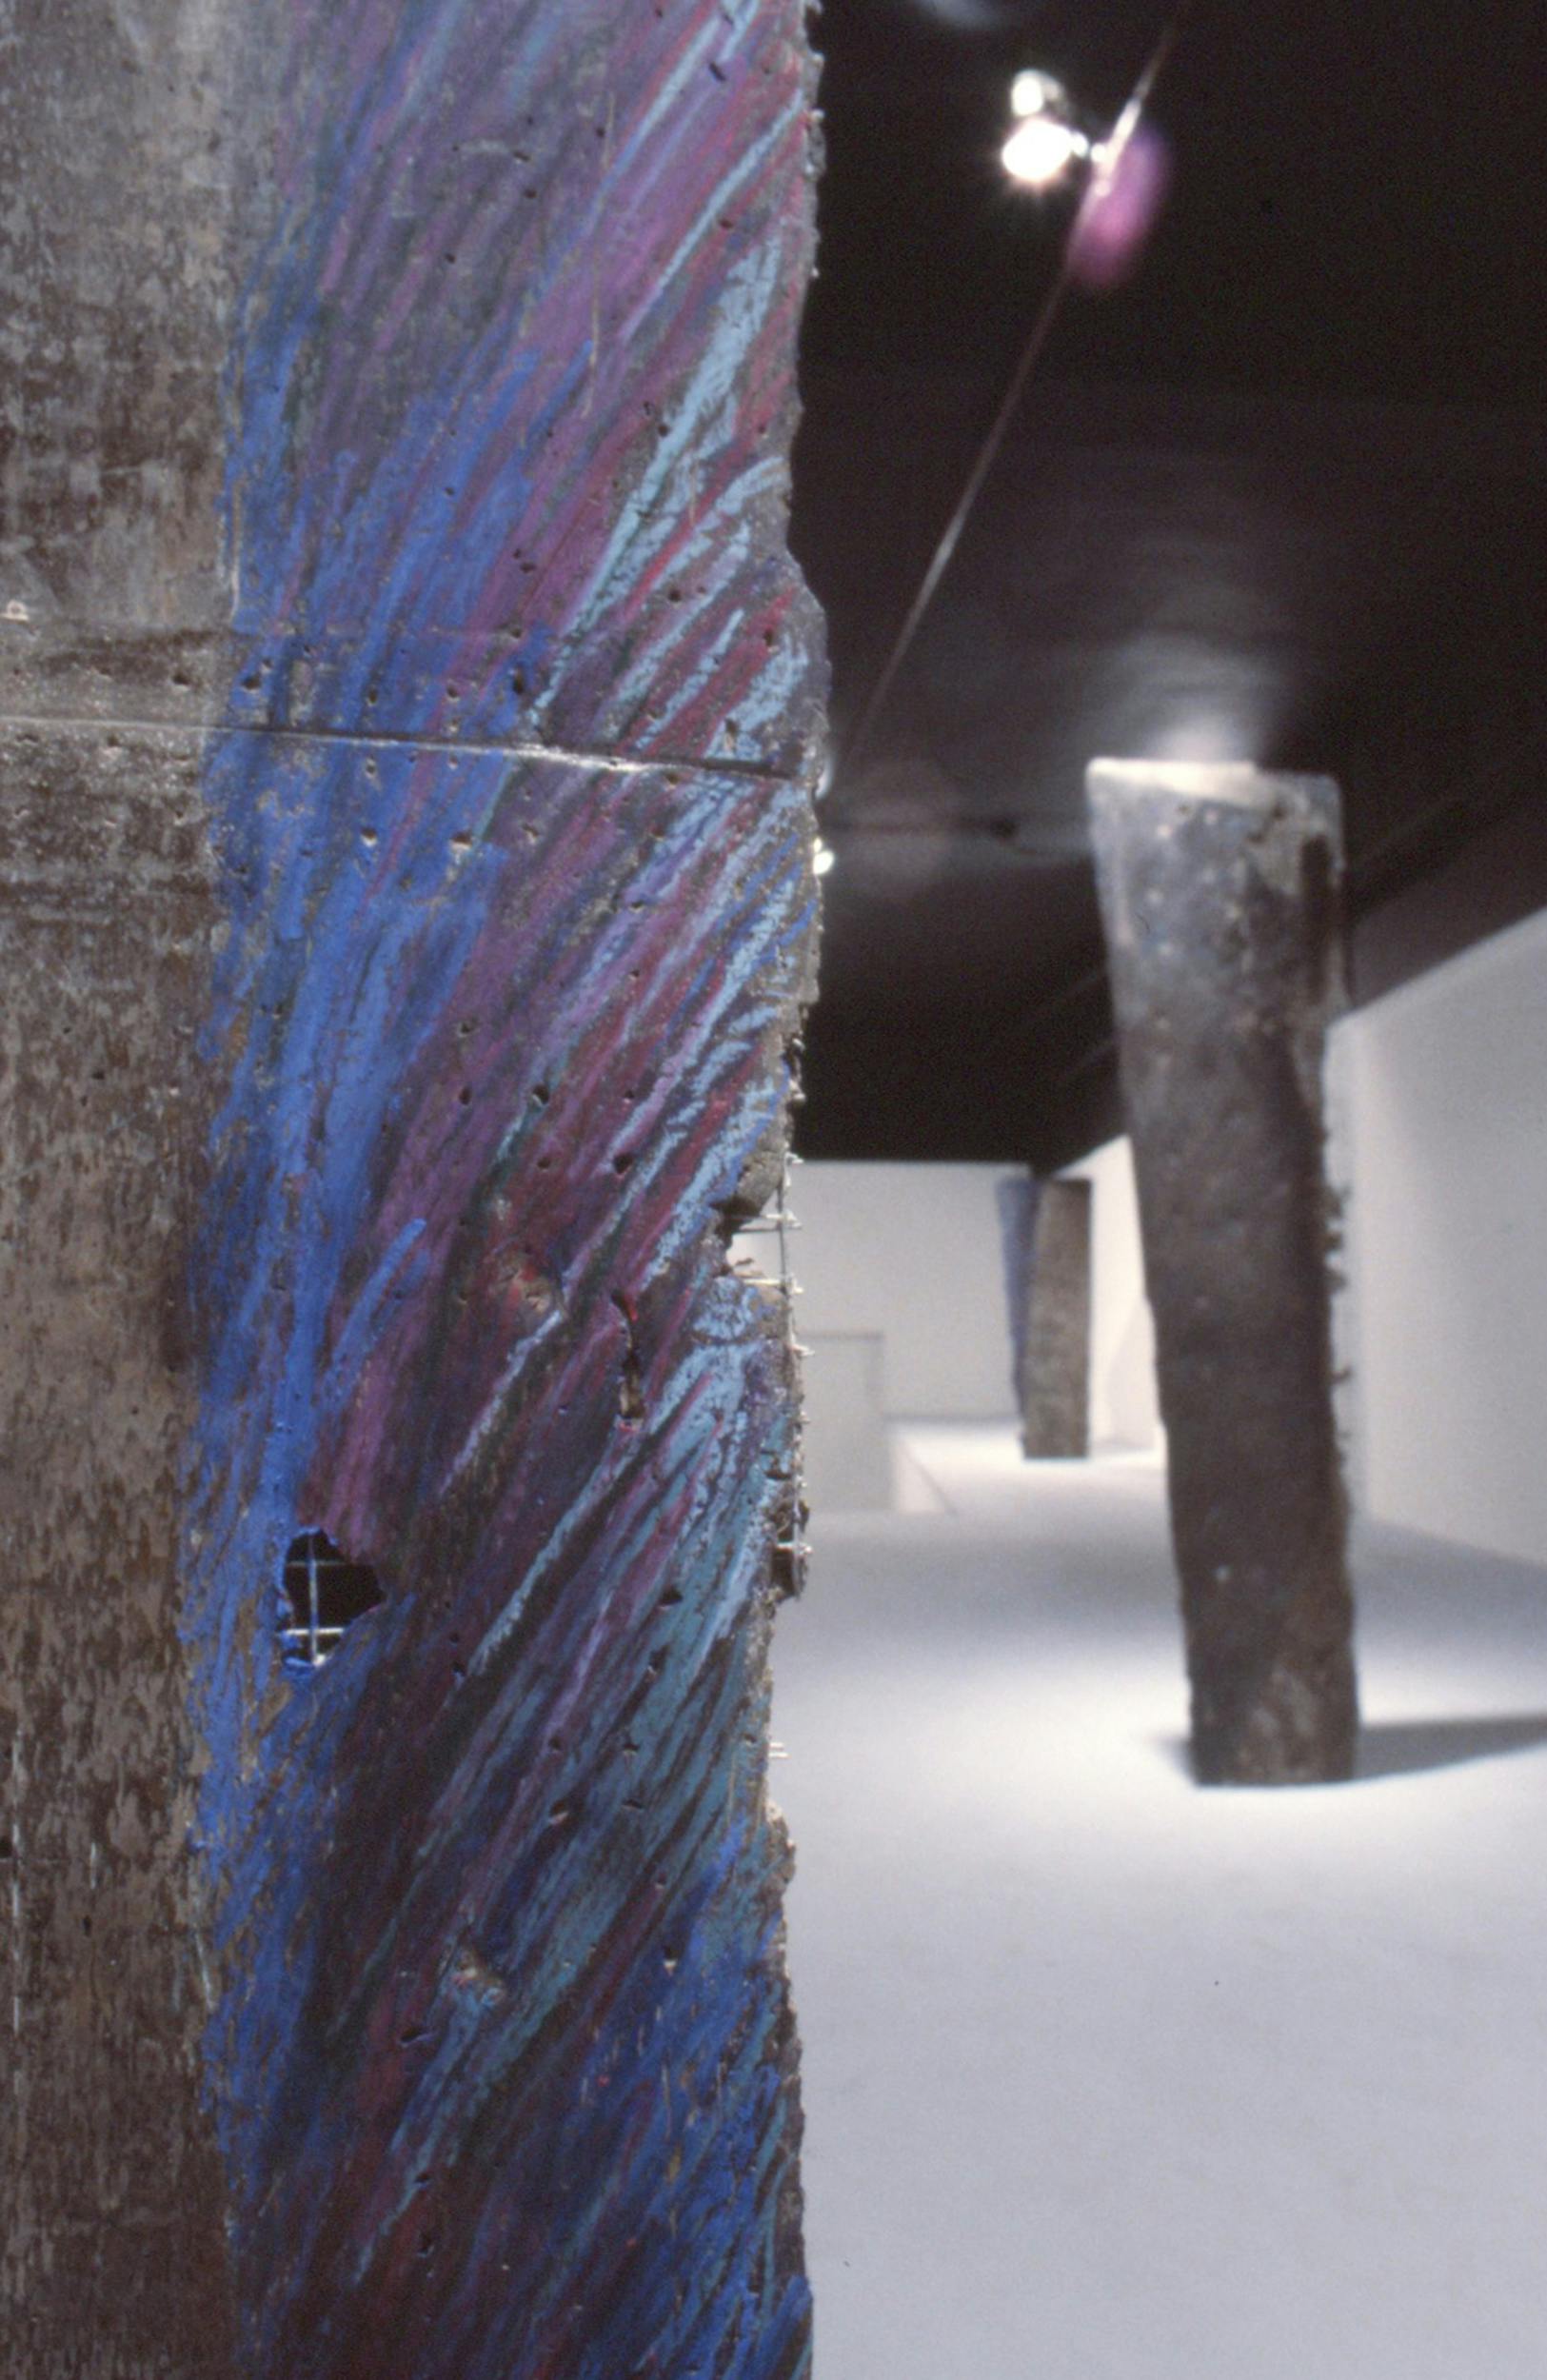 A close up view of a sculpture made of cast metal. The edge of the sculpture is coloured gestural strokes of blue and purple pastel. 